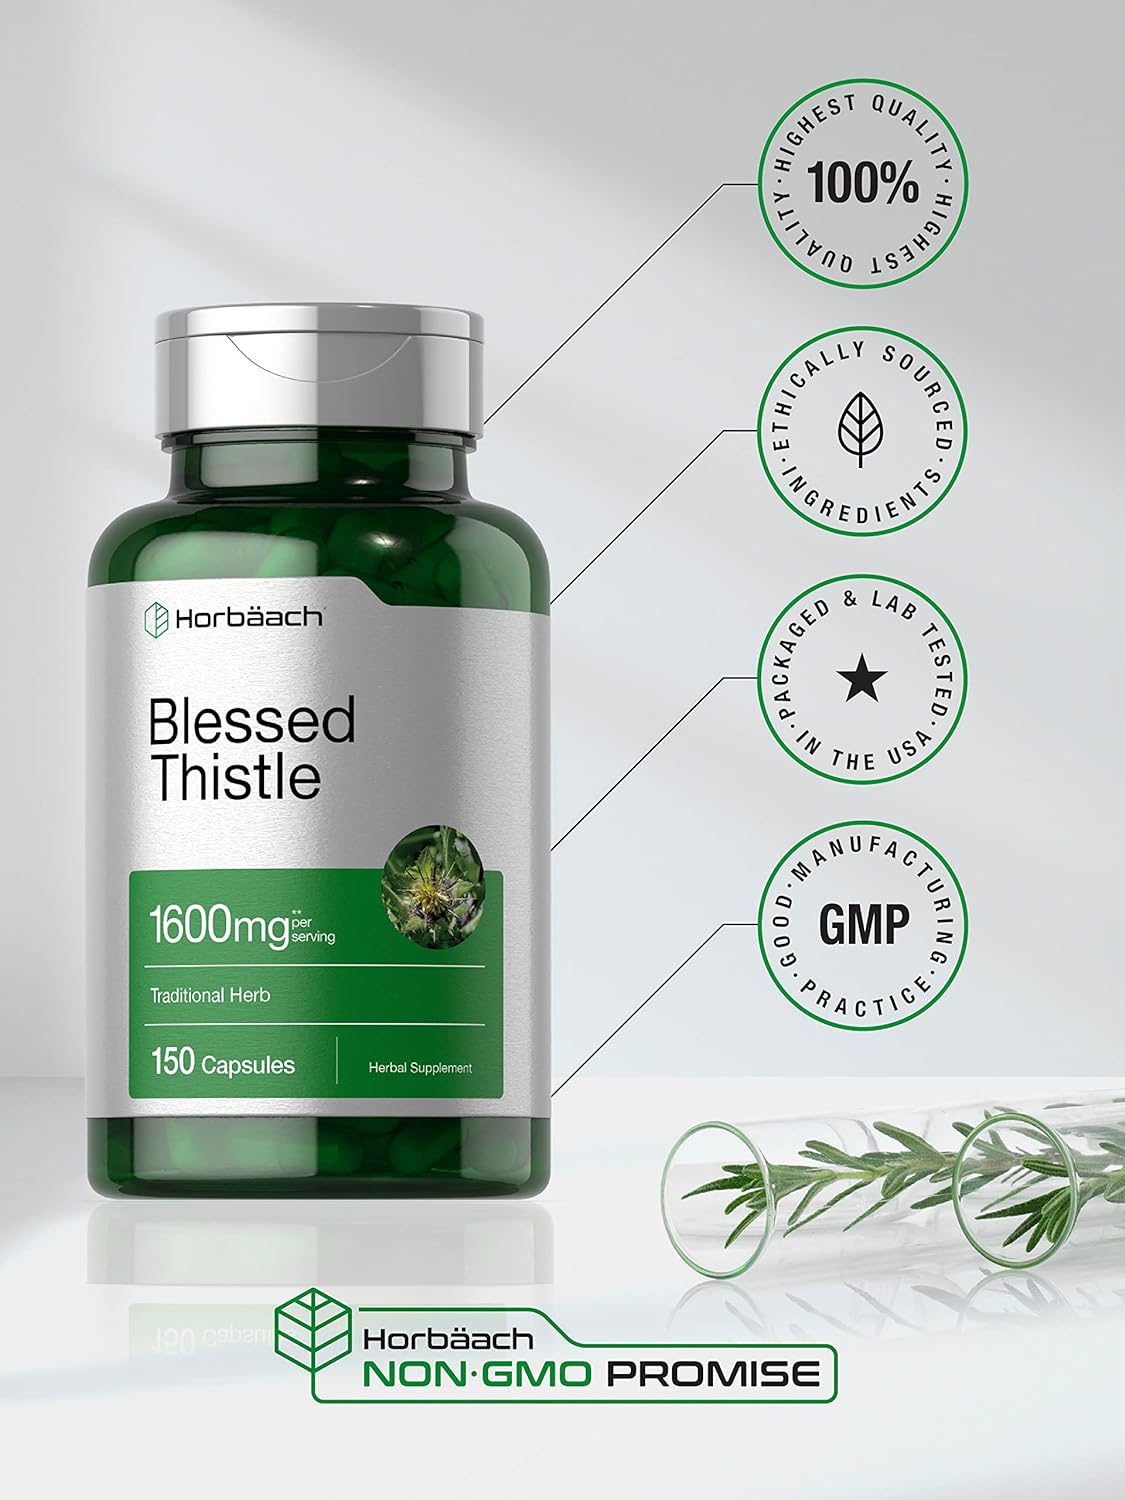 Horbaach Blessed Thistle Capsules 1600 mg | 150 Count | Max Potency | Non-GMO, Gluten Free Herb Supplement : Health & Household